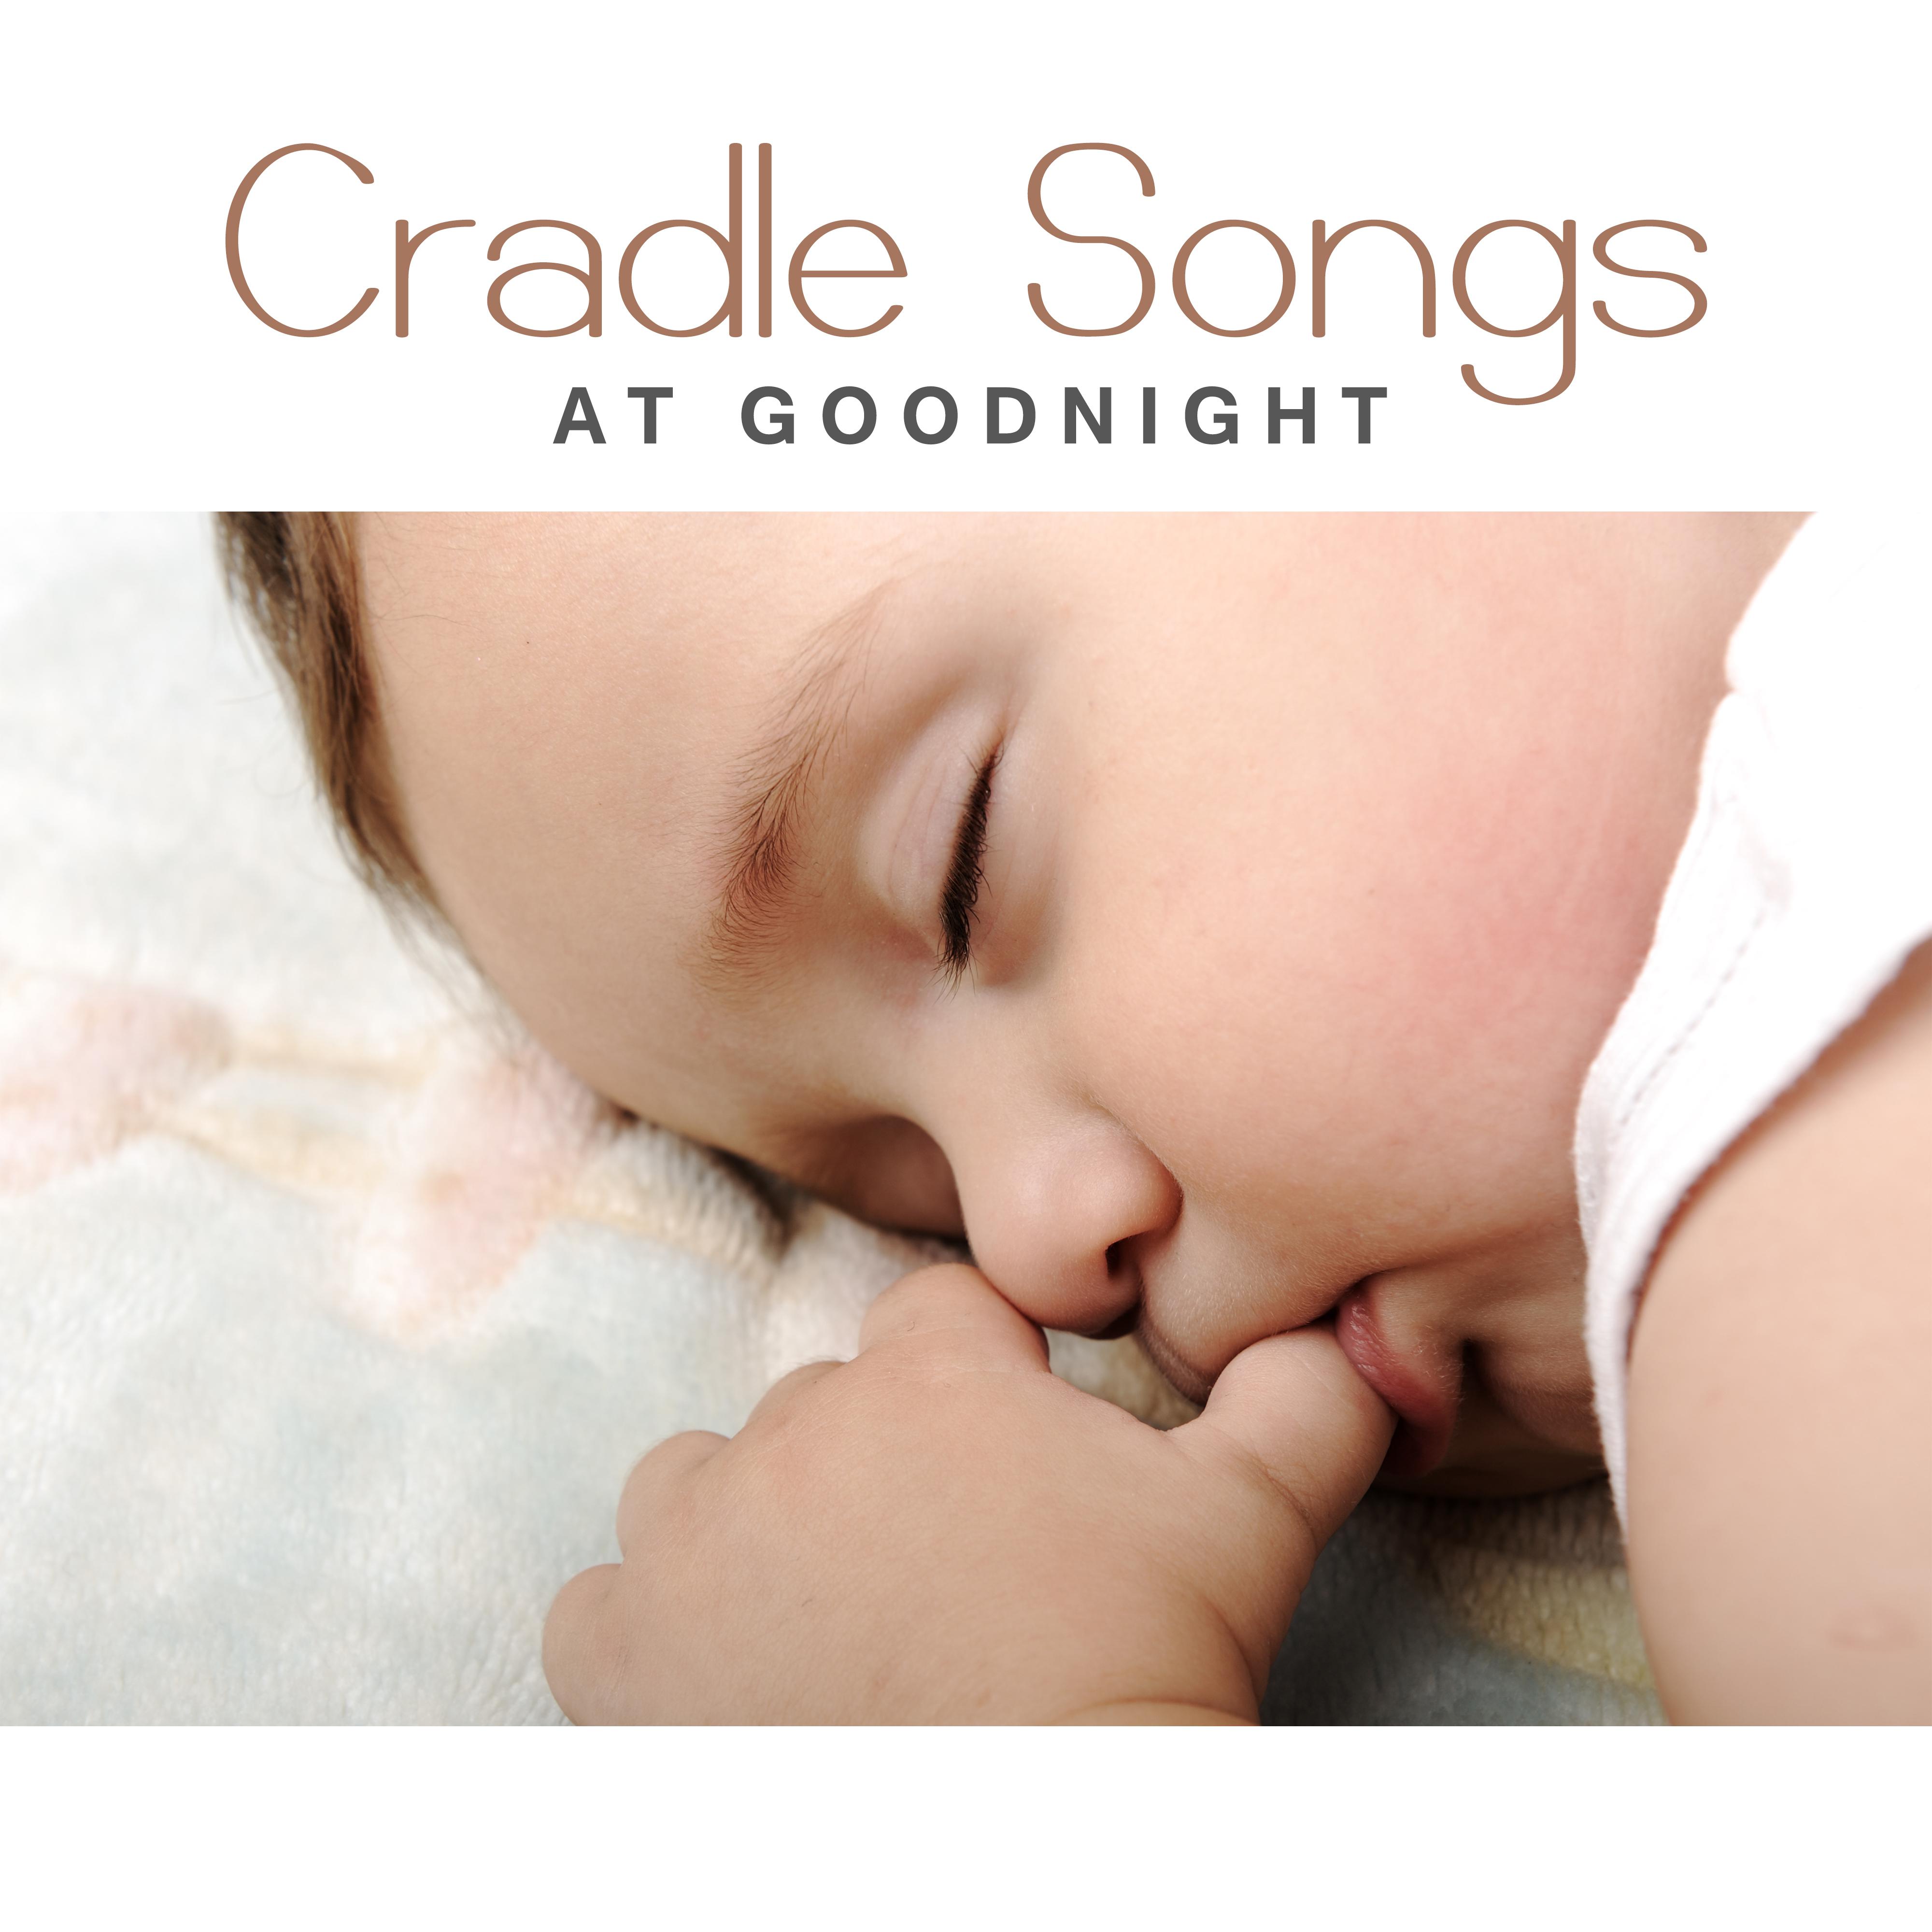 Cradle Songs at Goodnight  Sweet Dreams, Baby Naptime, Lullaby, Healing Music for Baby, Restful Sleep, Soothing Sounds